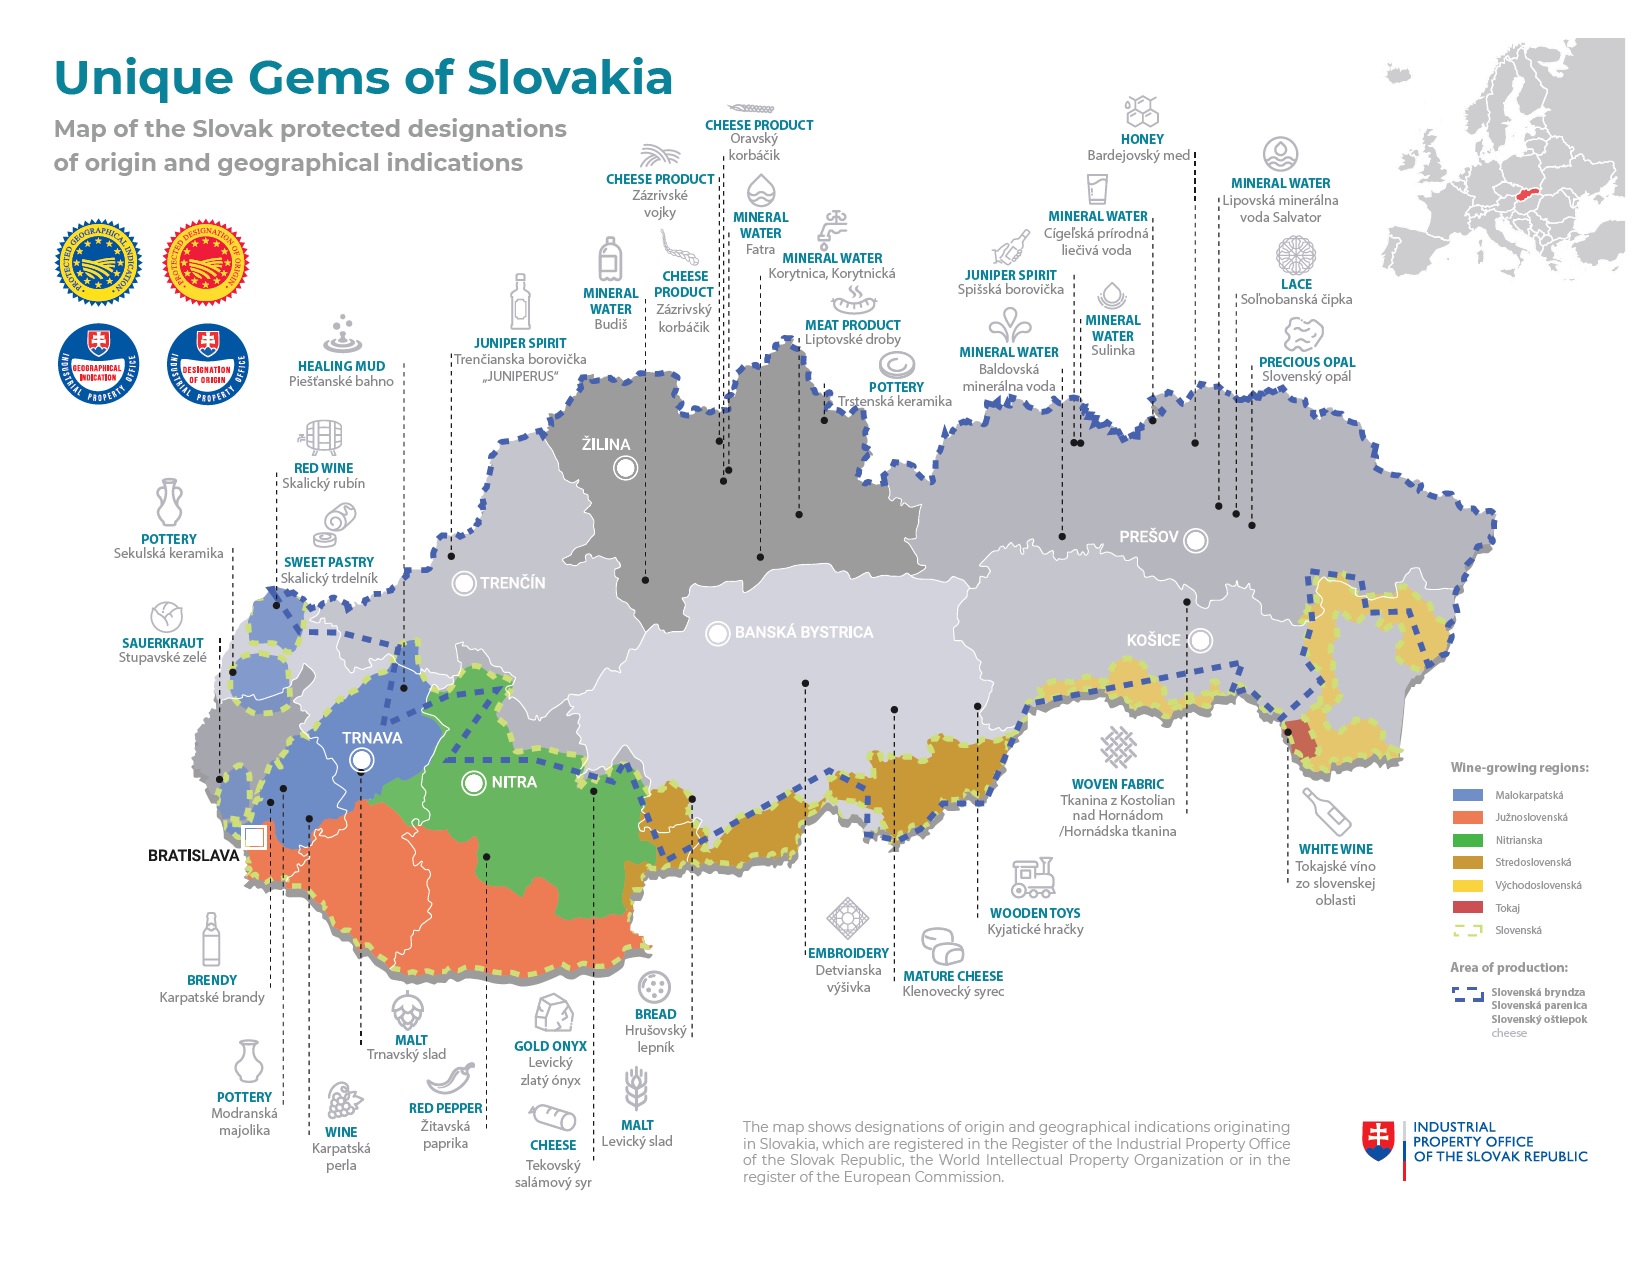 Map of the Slovak protected designations of origin and geographical indications